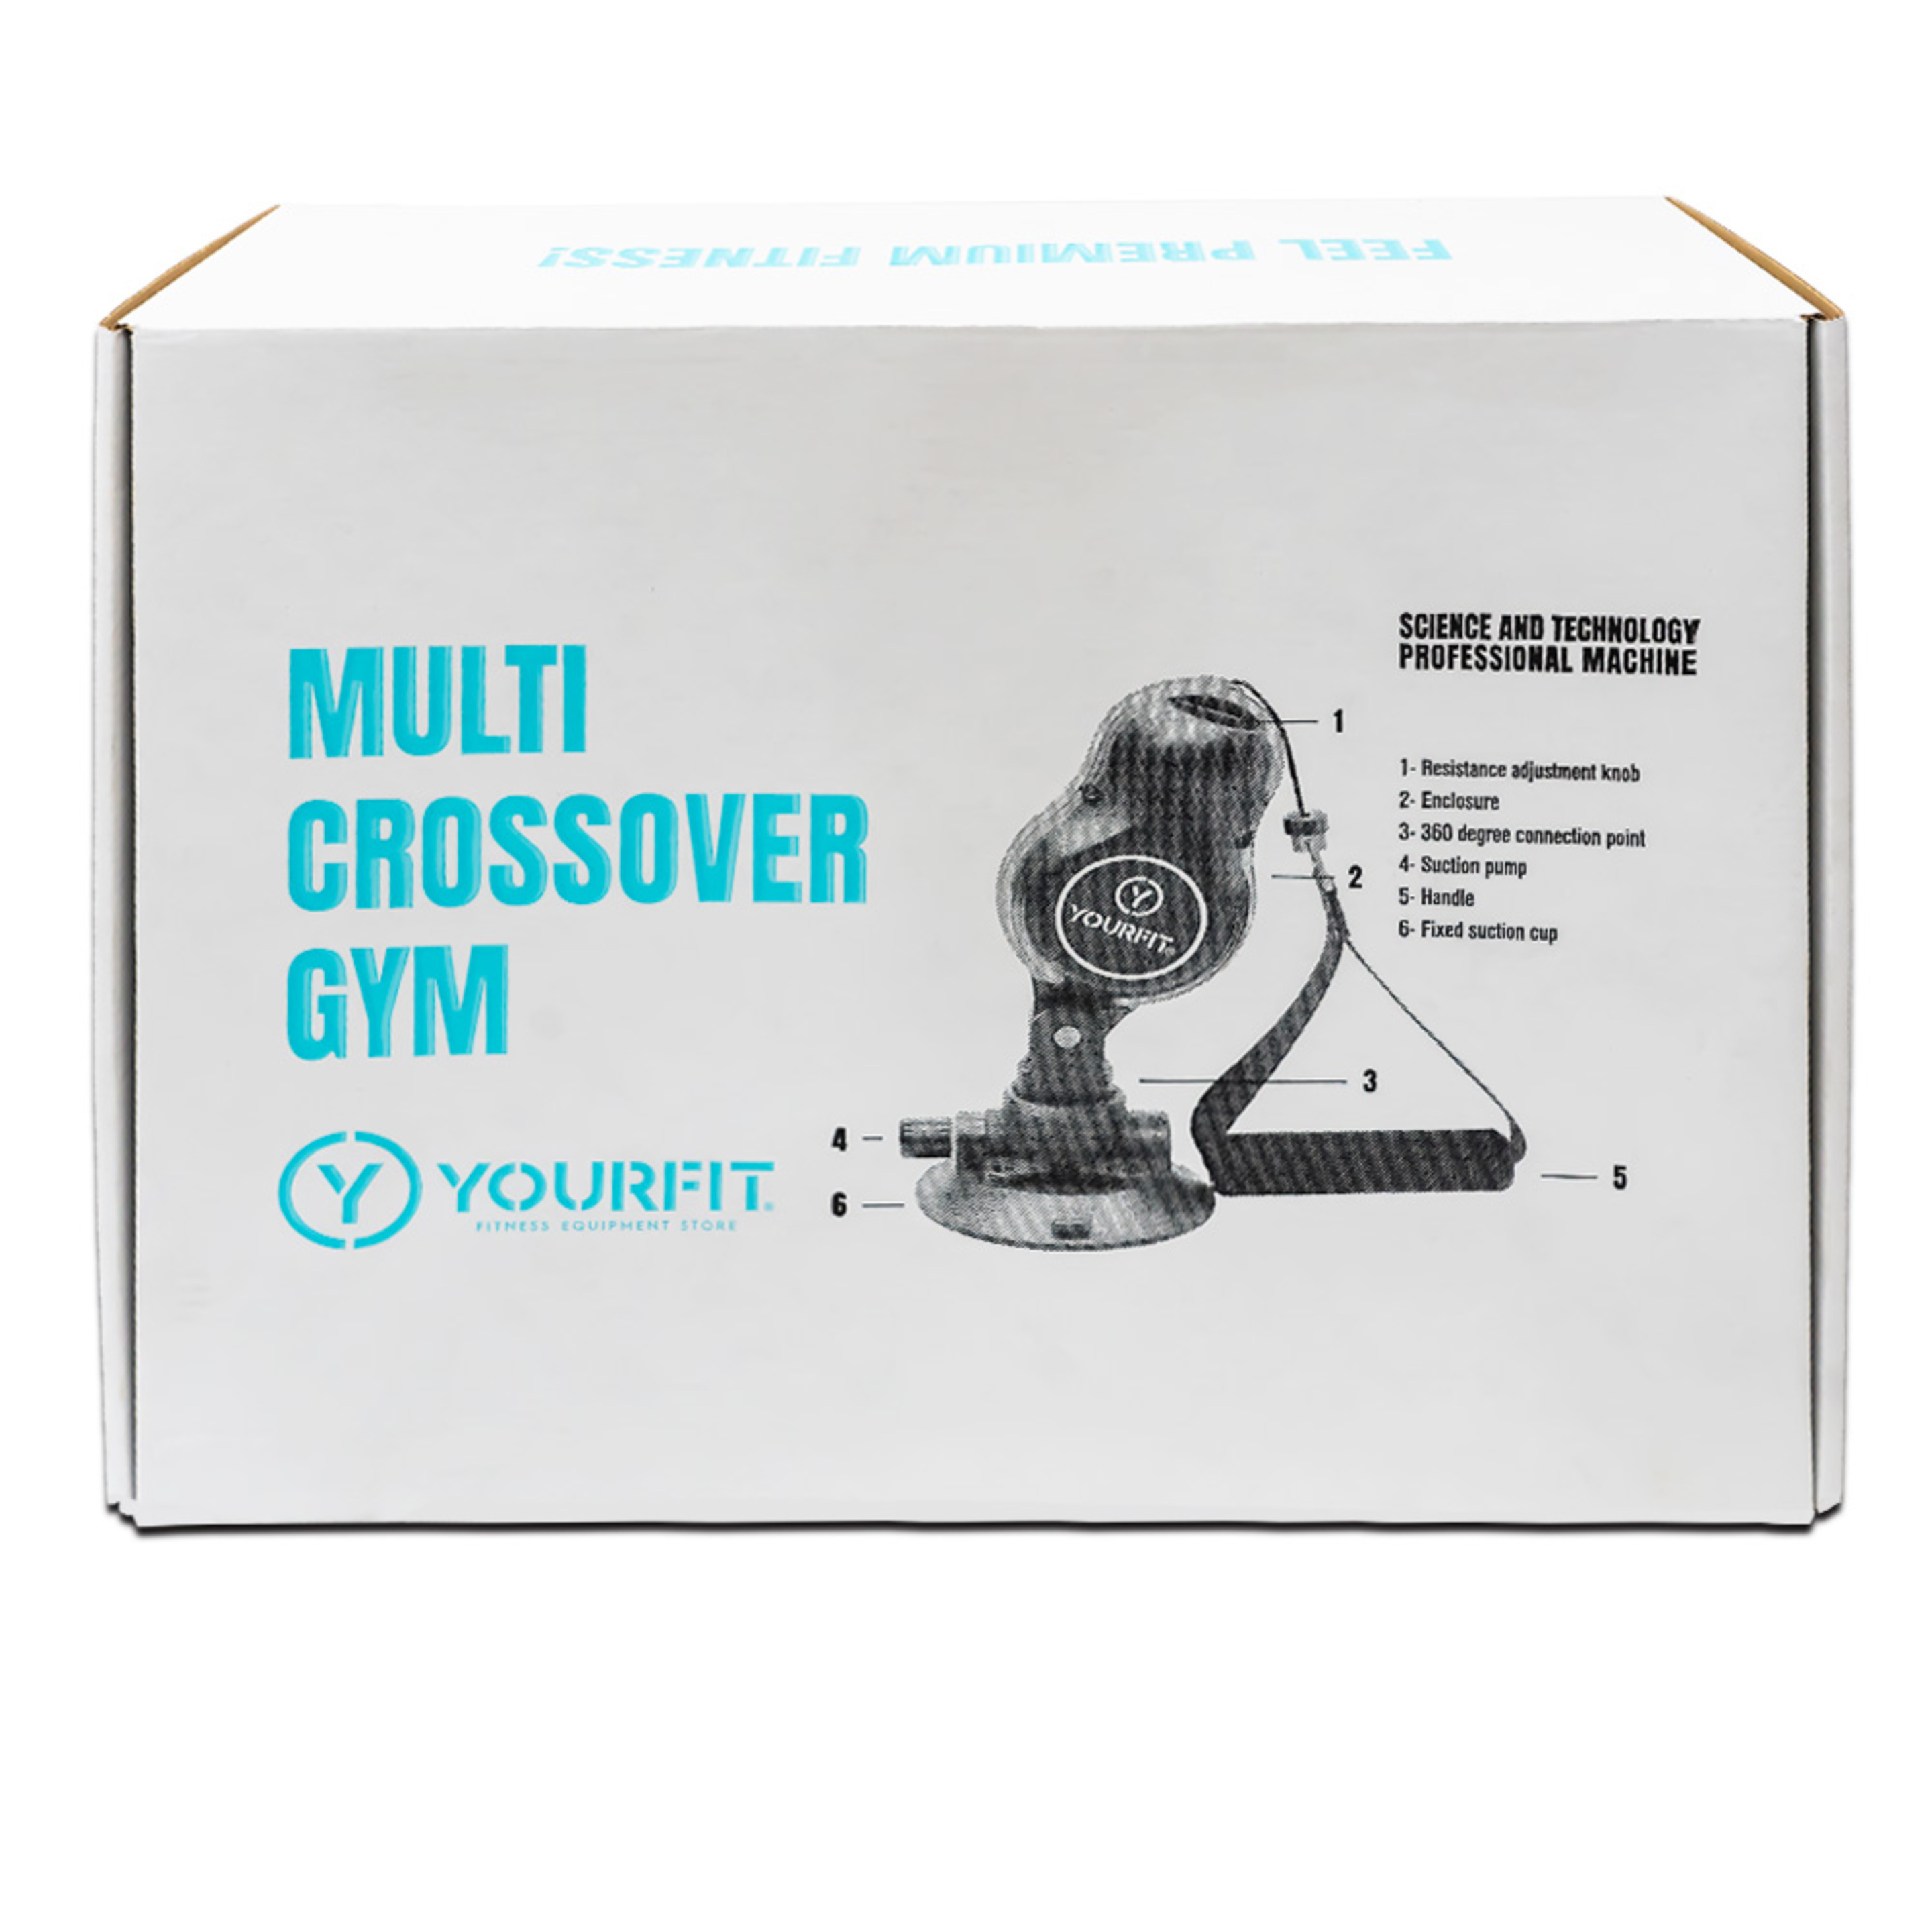 Multi Crossover Gym Yourfit